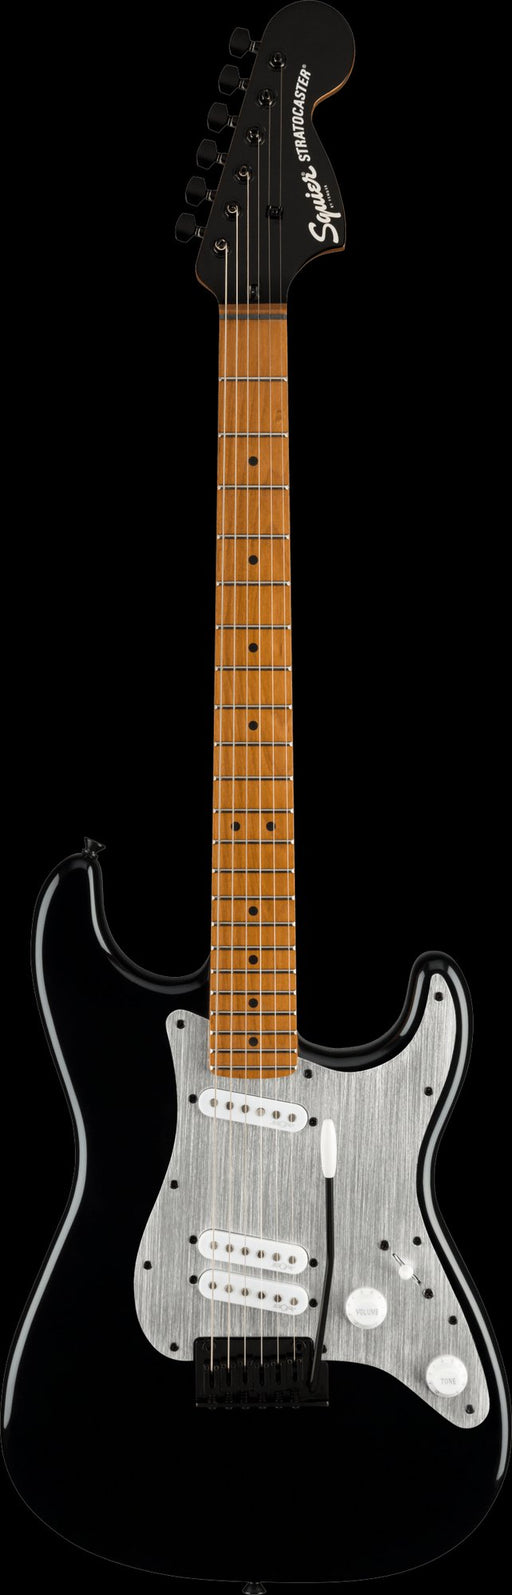 Squier Contemporary Stratocaster Special Roasted Maple Fingerboard Silver Anodized Pickguard Black Electric Guitar